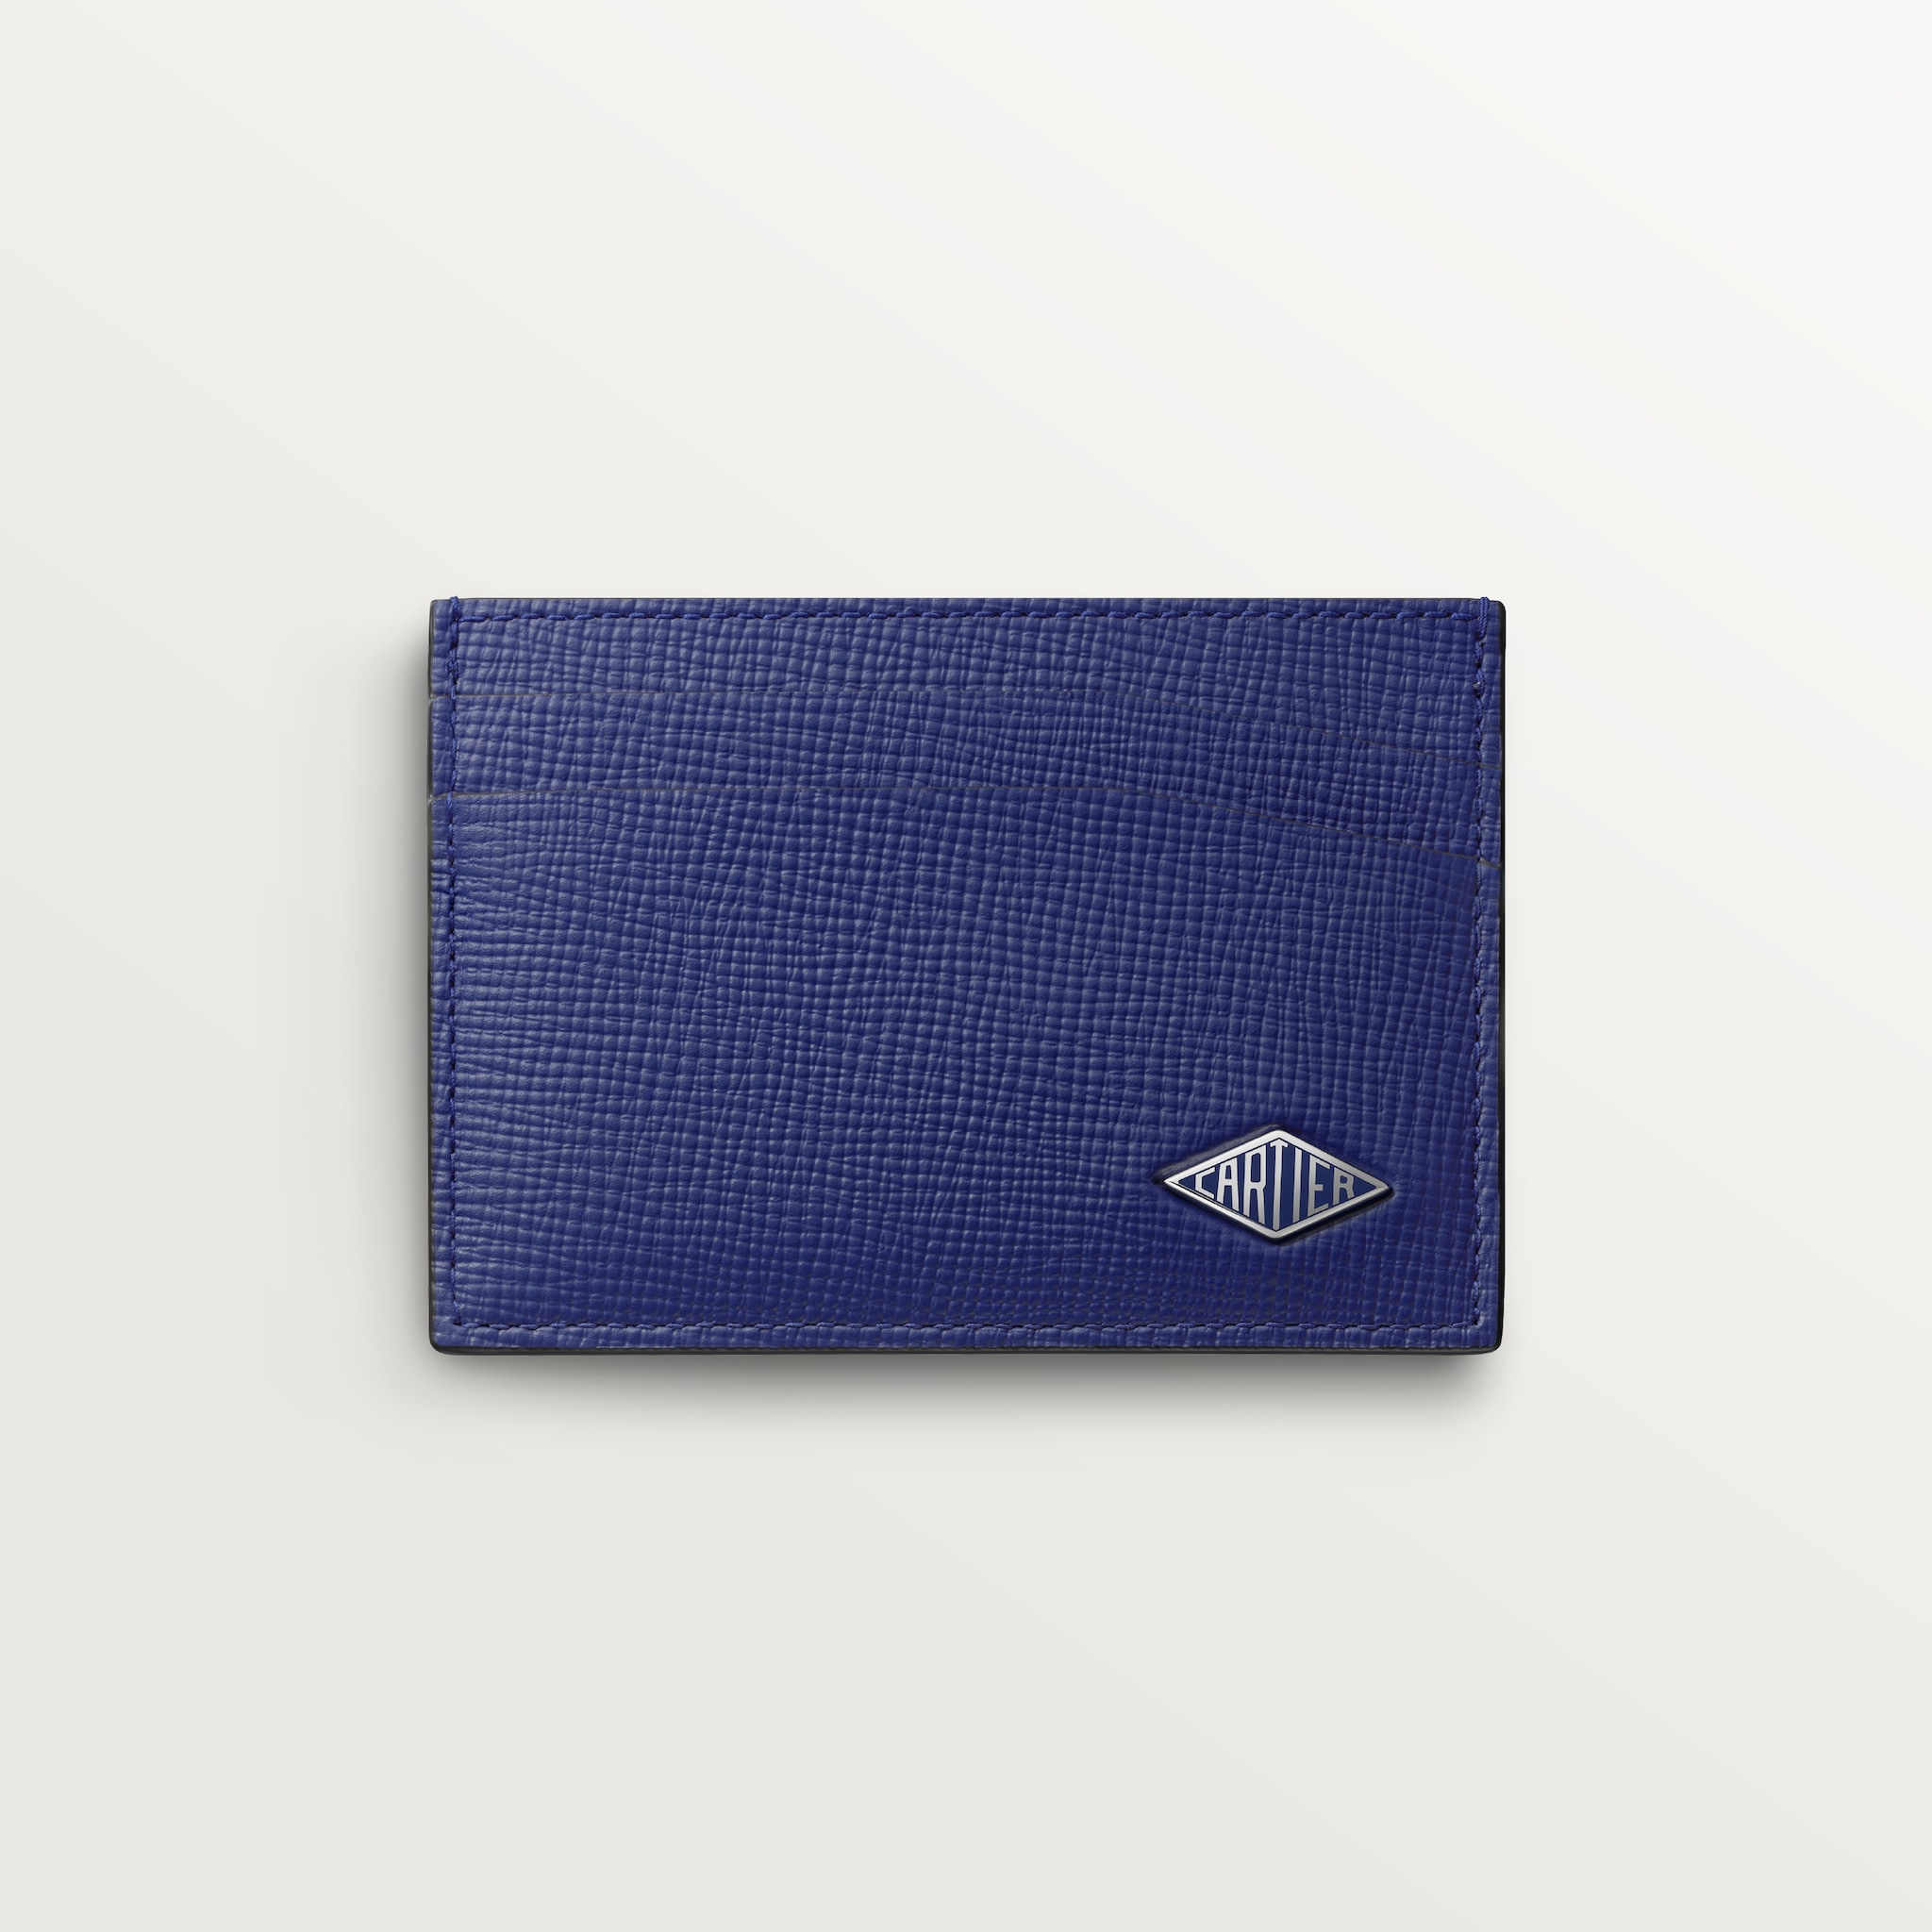 Cartier Losange Small Leather Goods, Card holderGrained ink calfskin